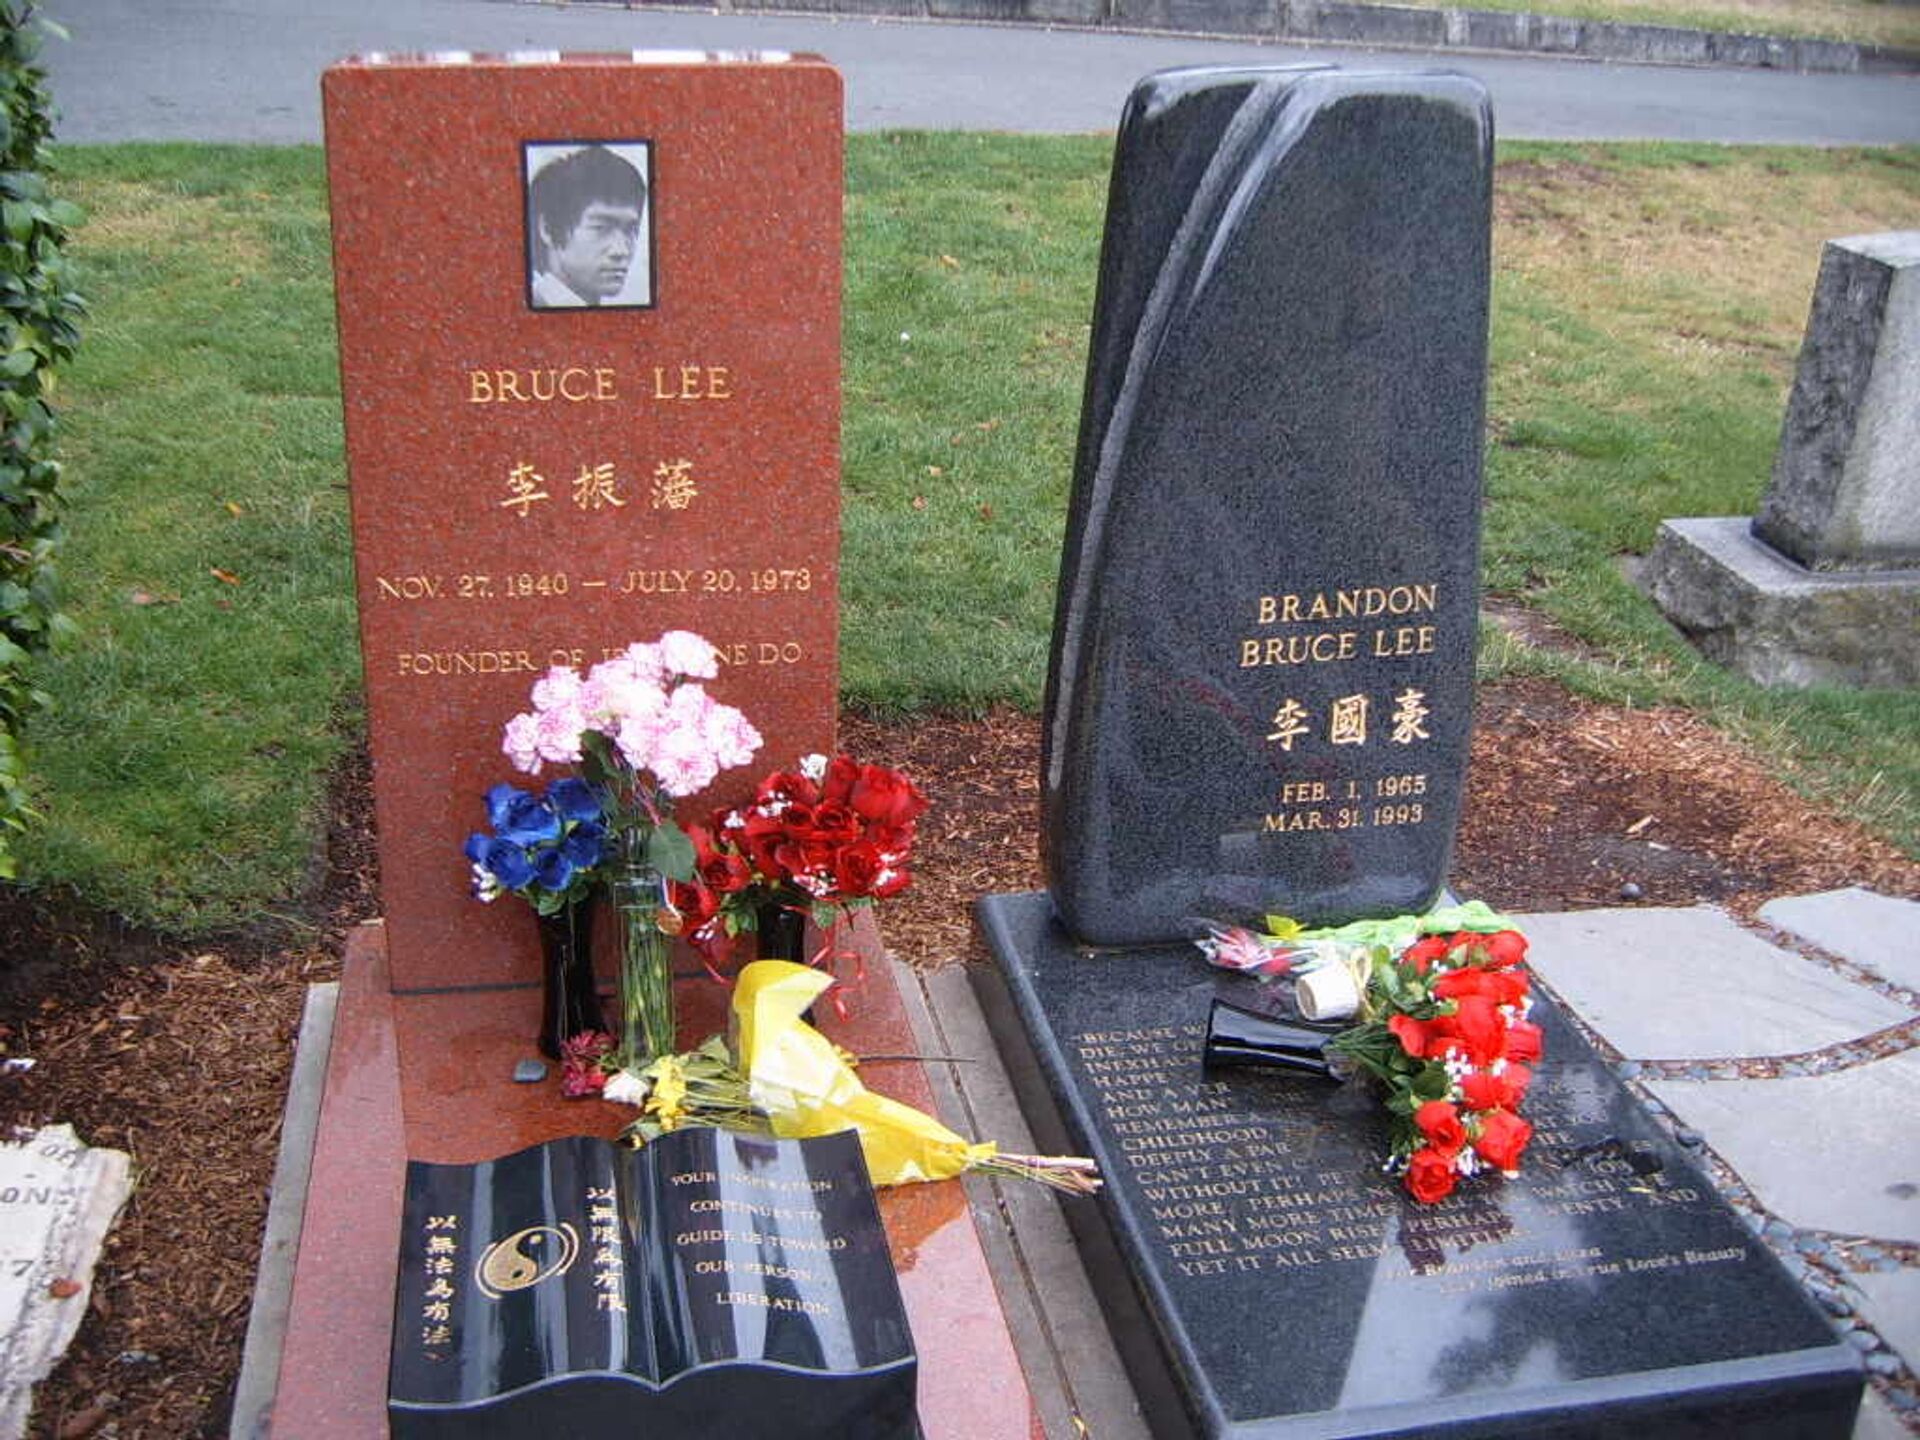 Bruce Lee's headstone along with his son's, Brandon Lee, who died from a bullet firing accidentally during the filming of the movie The Crow.  - Sputnik International, 1920, 22.10.2021